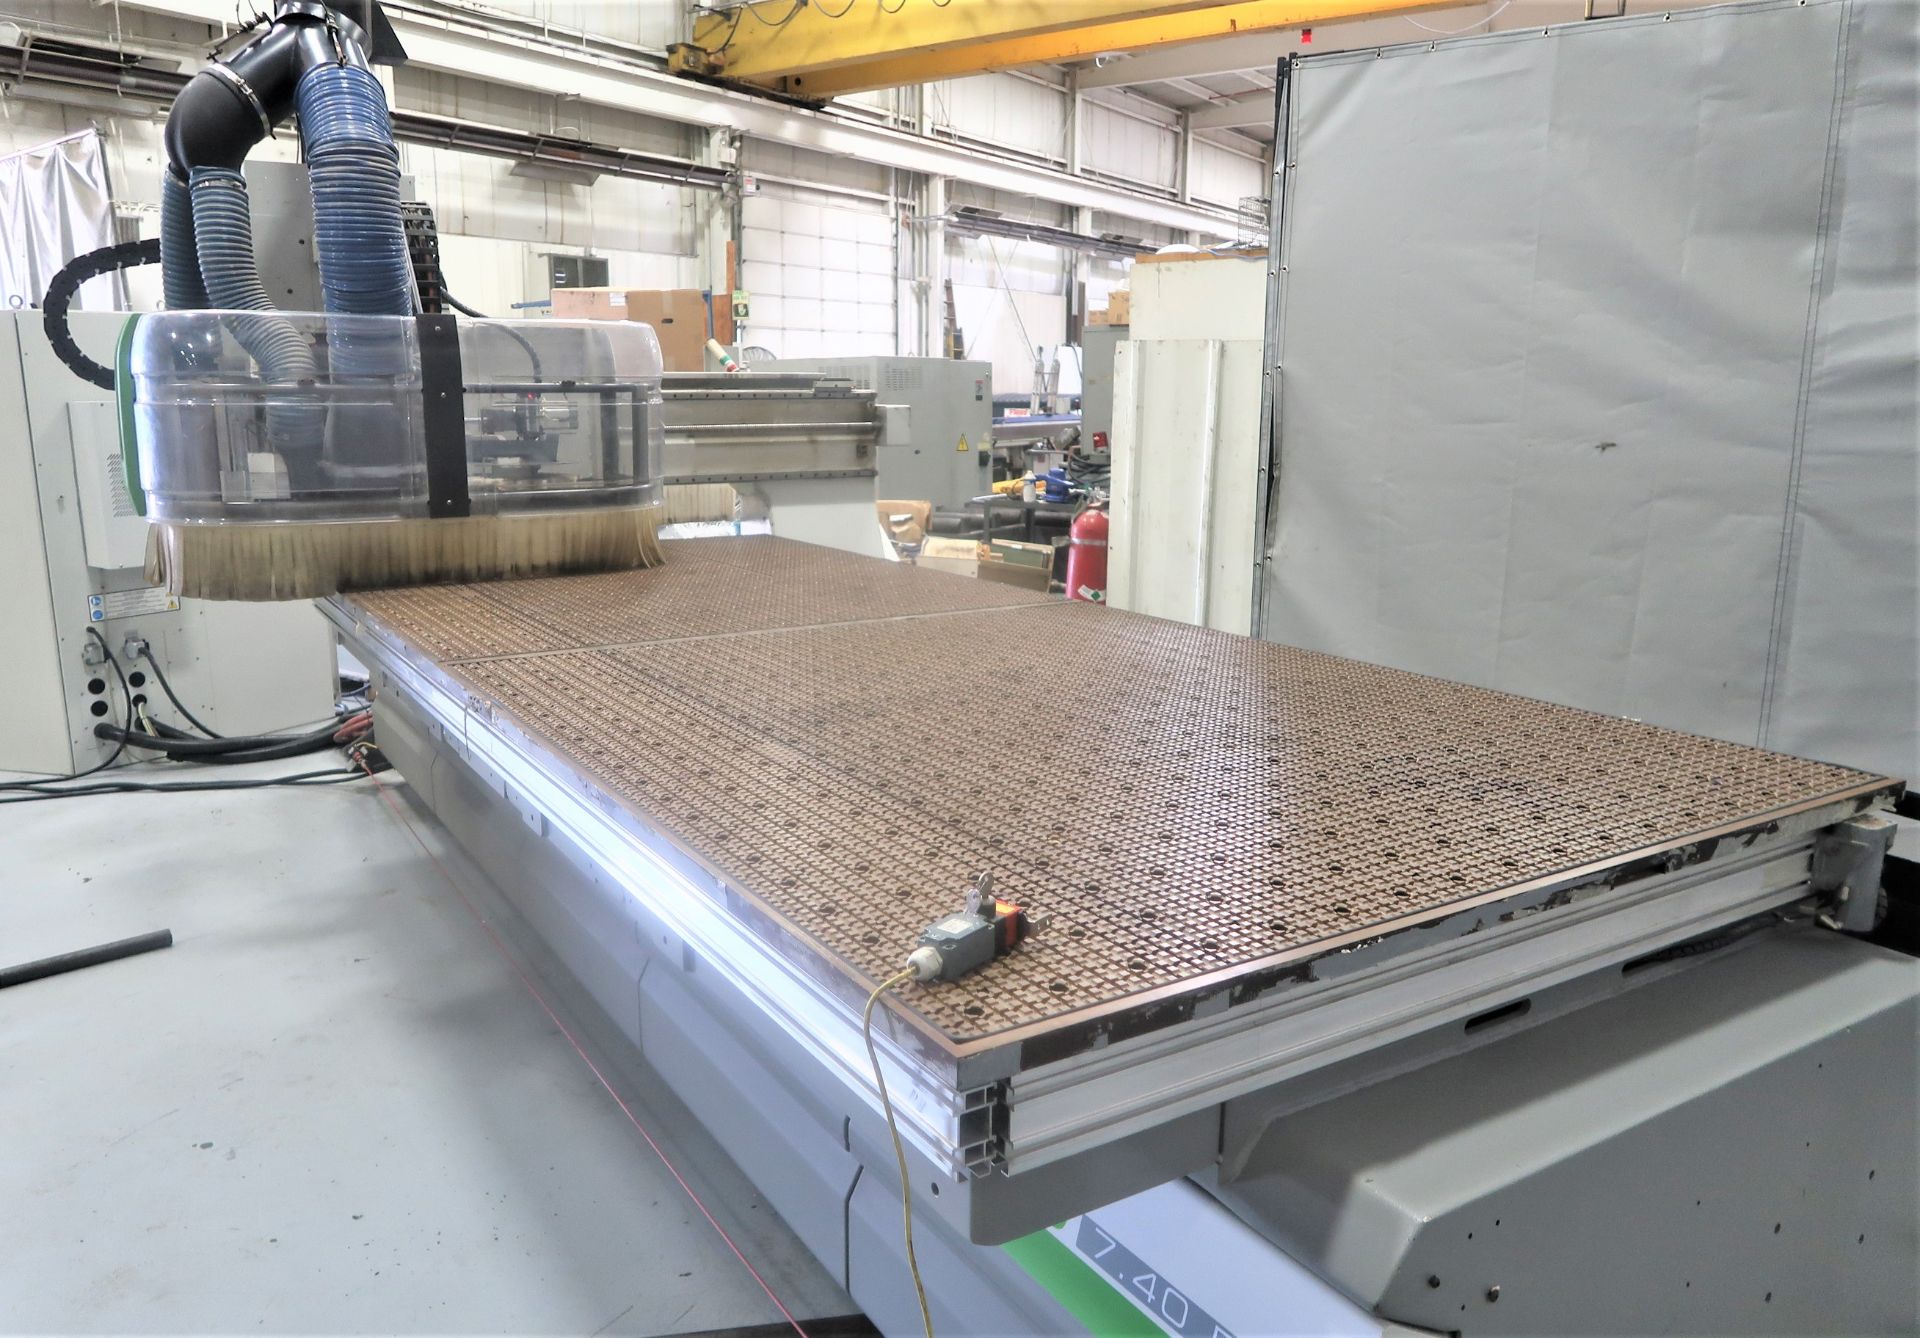 5'x12' Biesse Rover B 7.40 ft CNC 3-Axis Router with Boring Unit & Aggregate Saw, S/N 64574 - Image 2 of 14